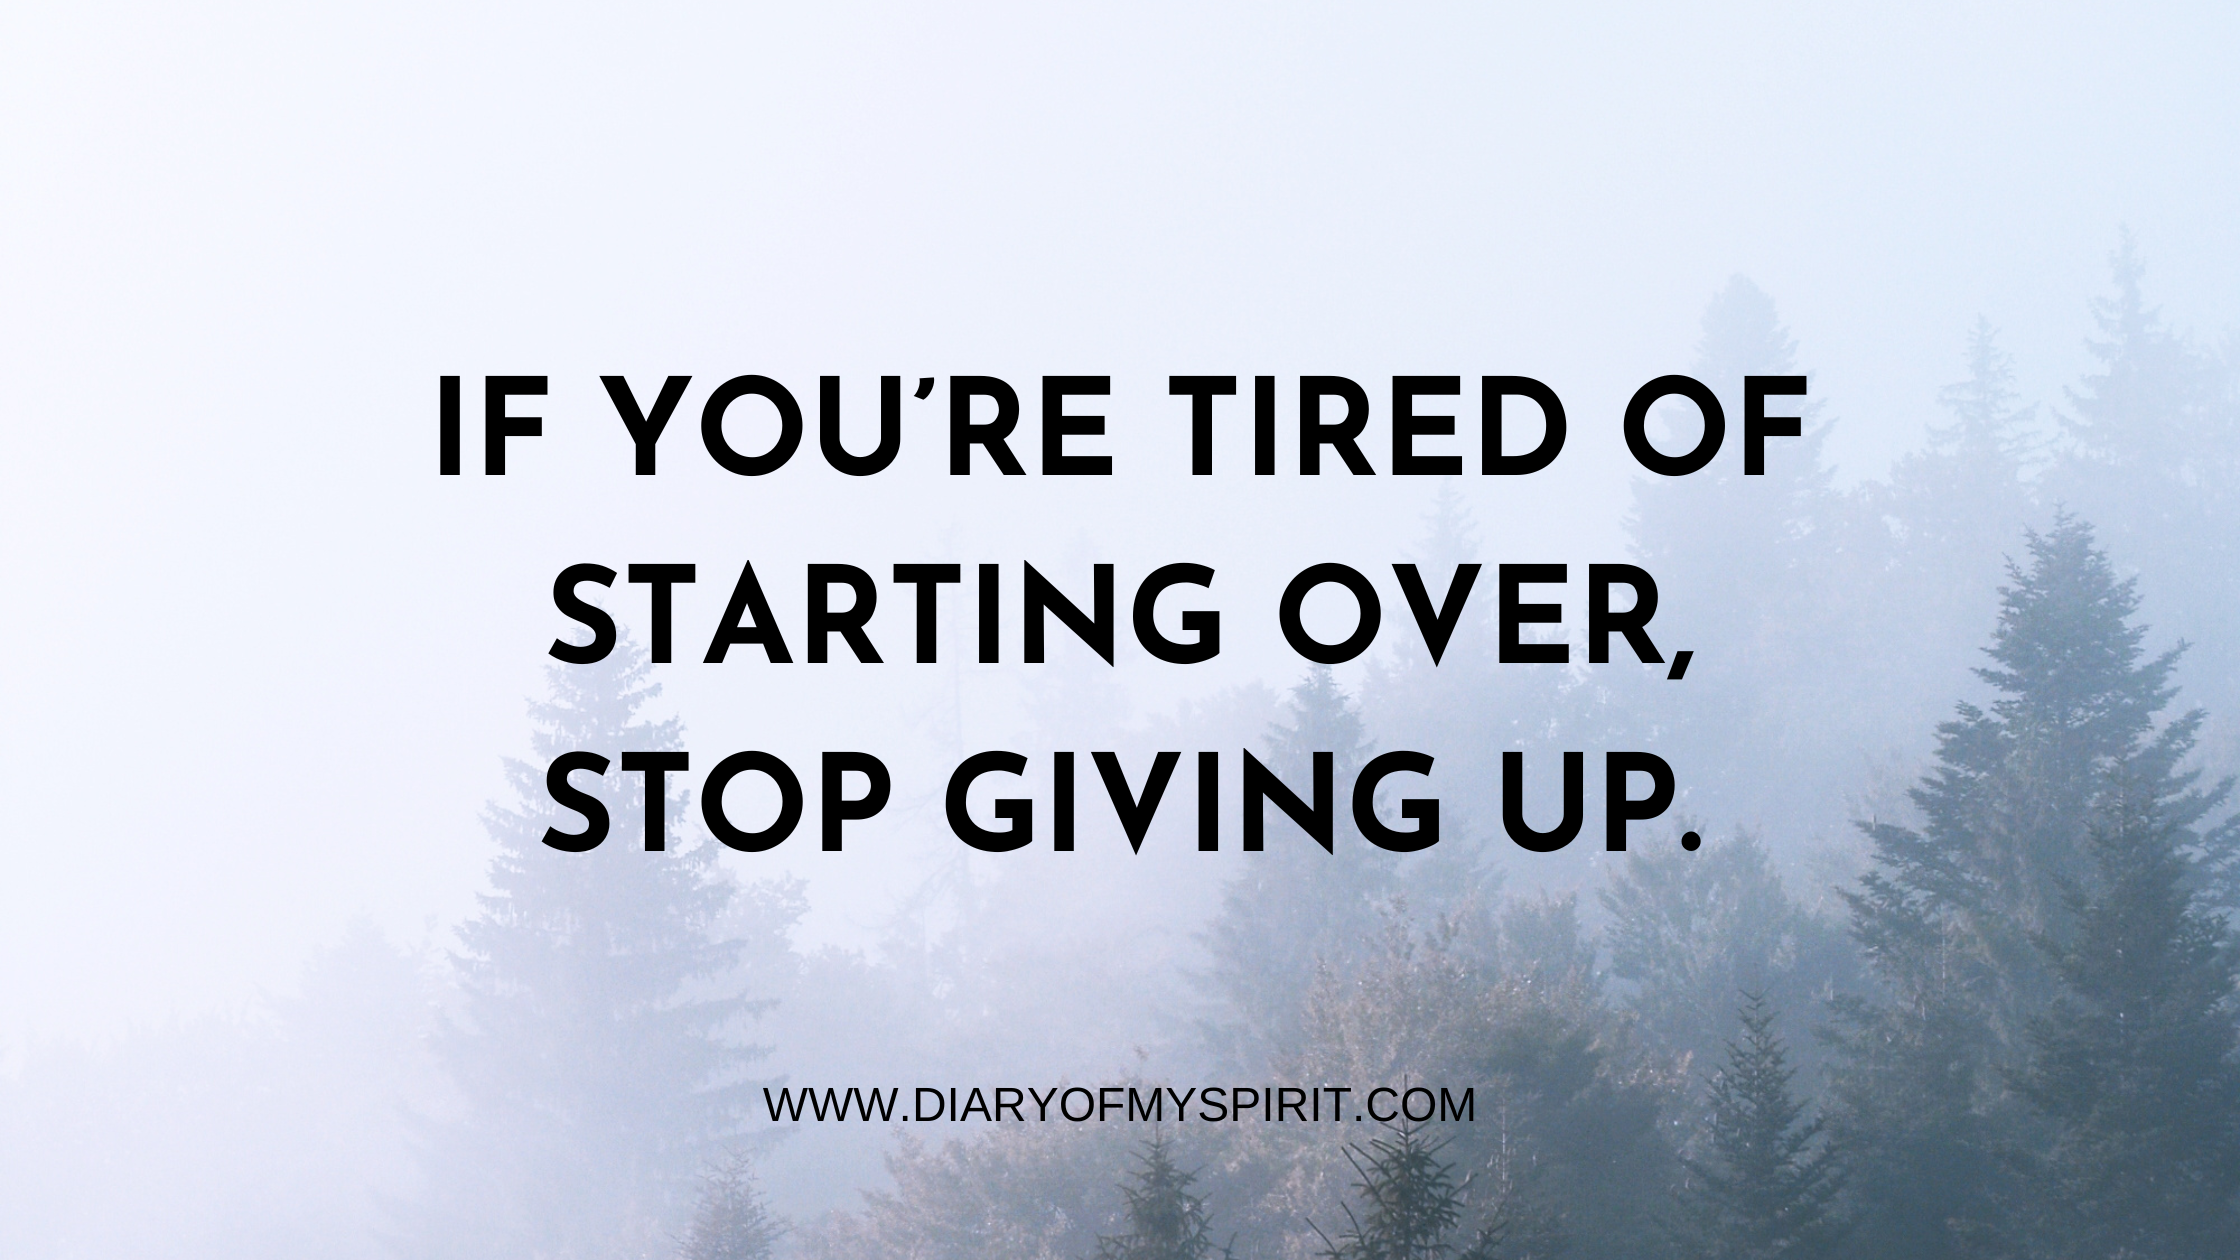 if you're tired of starting over, stop giving up. life mottos to live by. life motto. life mottos. motto quote. mottos in life. mottos about life. mottos for life. motto life. motto in life. motto to live by. life's mottos. mottos examples. motto quotes. motto examples. examples of motto. personal motto. mottos to live by. good mottos. best mottos. personal mottos.